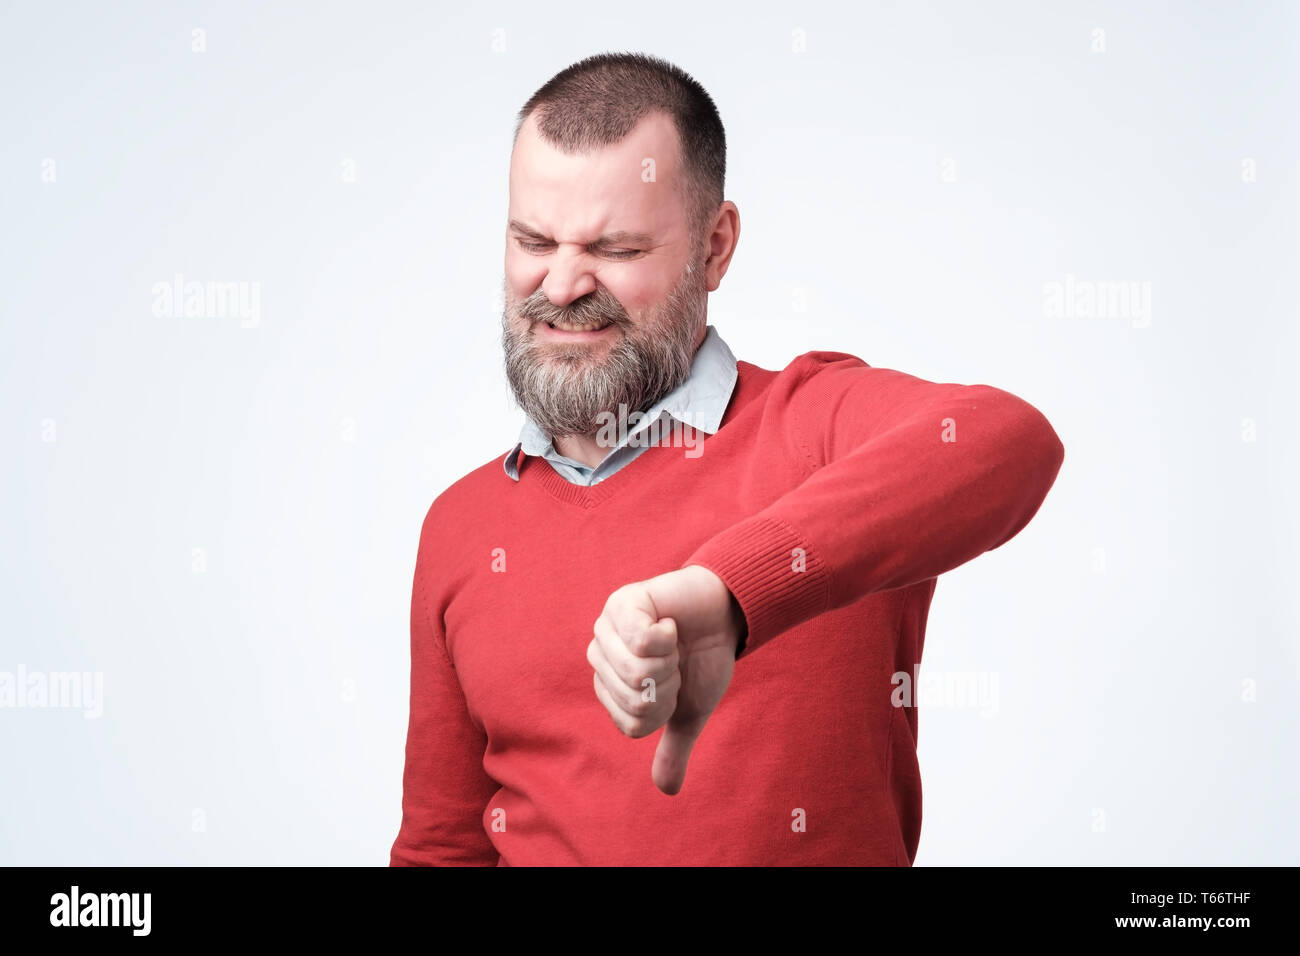 Man in red sweater gives vthumbs down gesture. Stock Photo